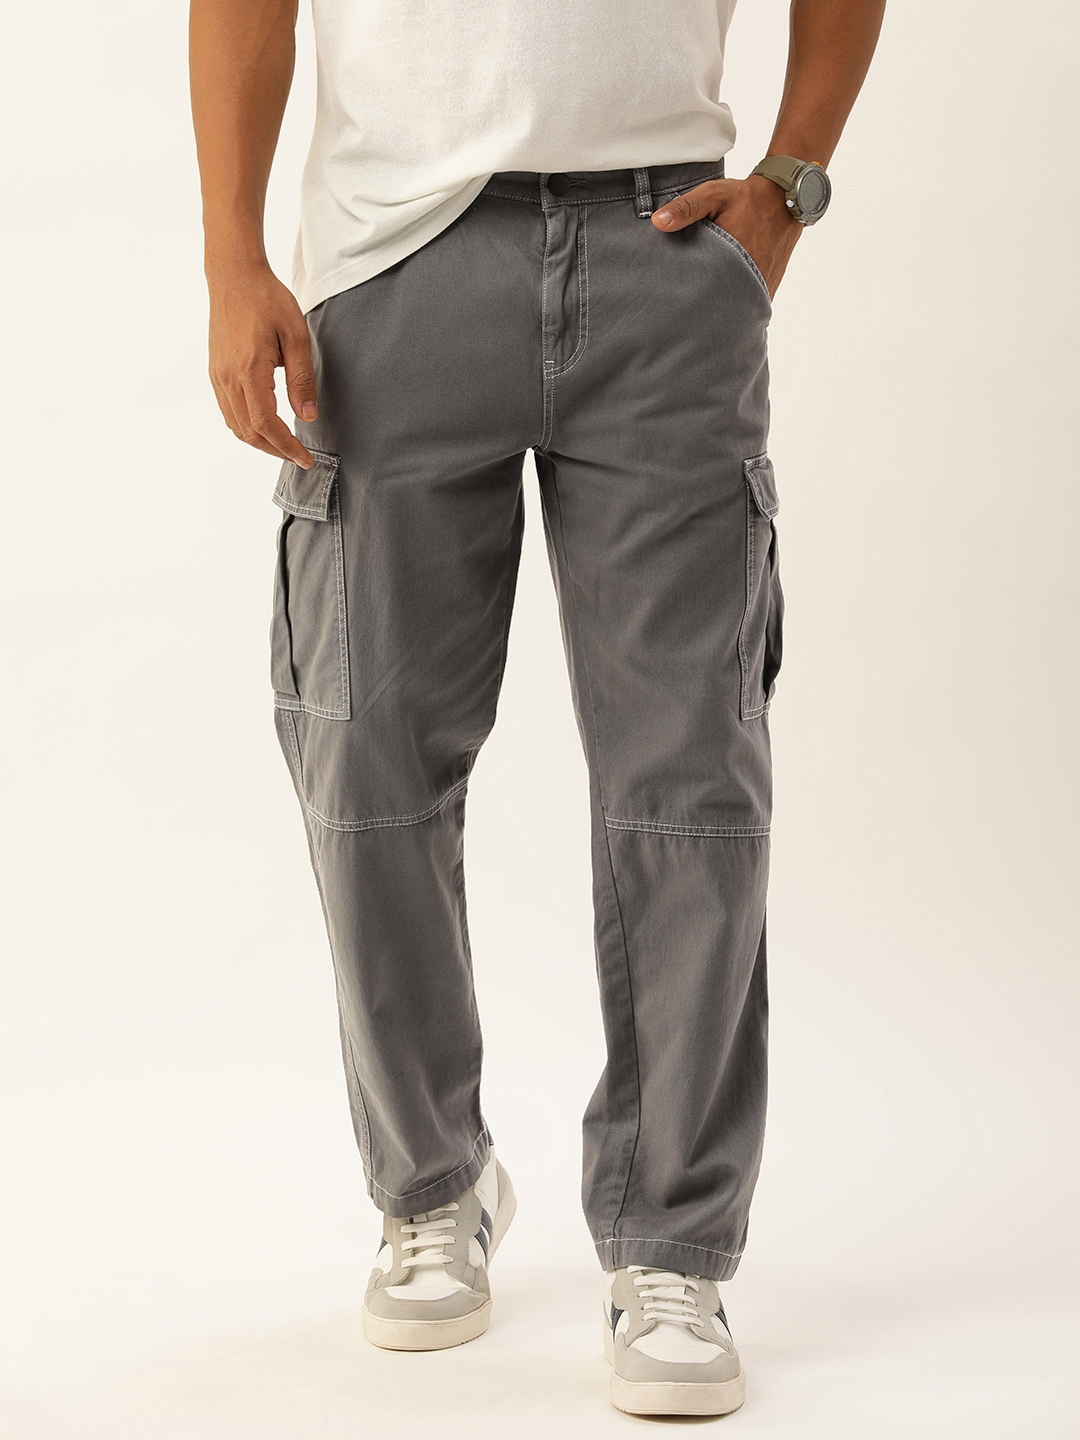 A Puee Relaxed Fit Cargo Pants - S / Grey